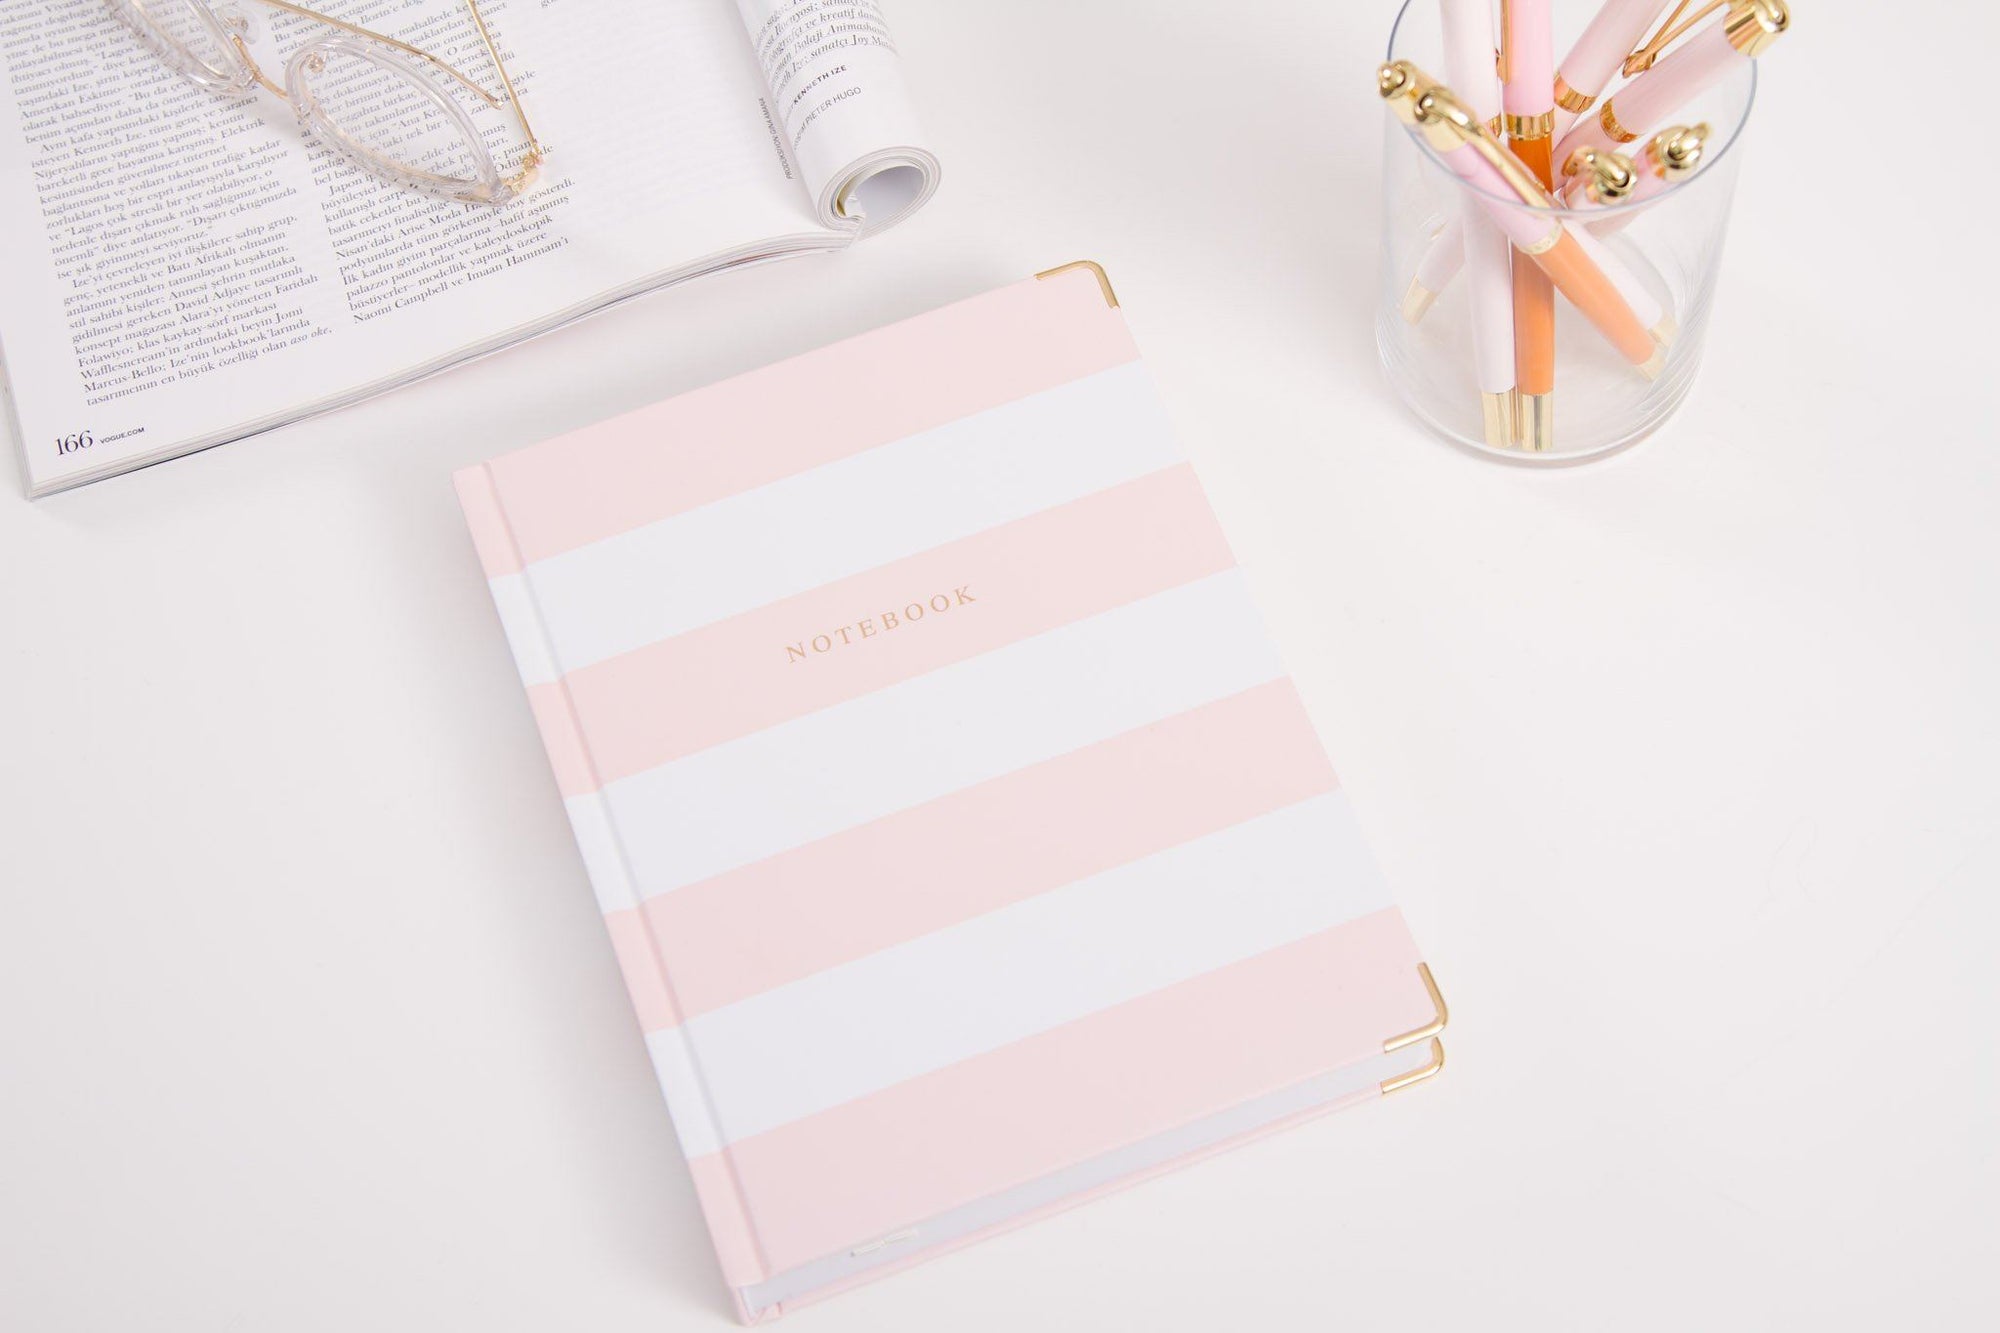 Notebook - Pink & White - Chapters